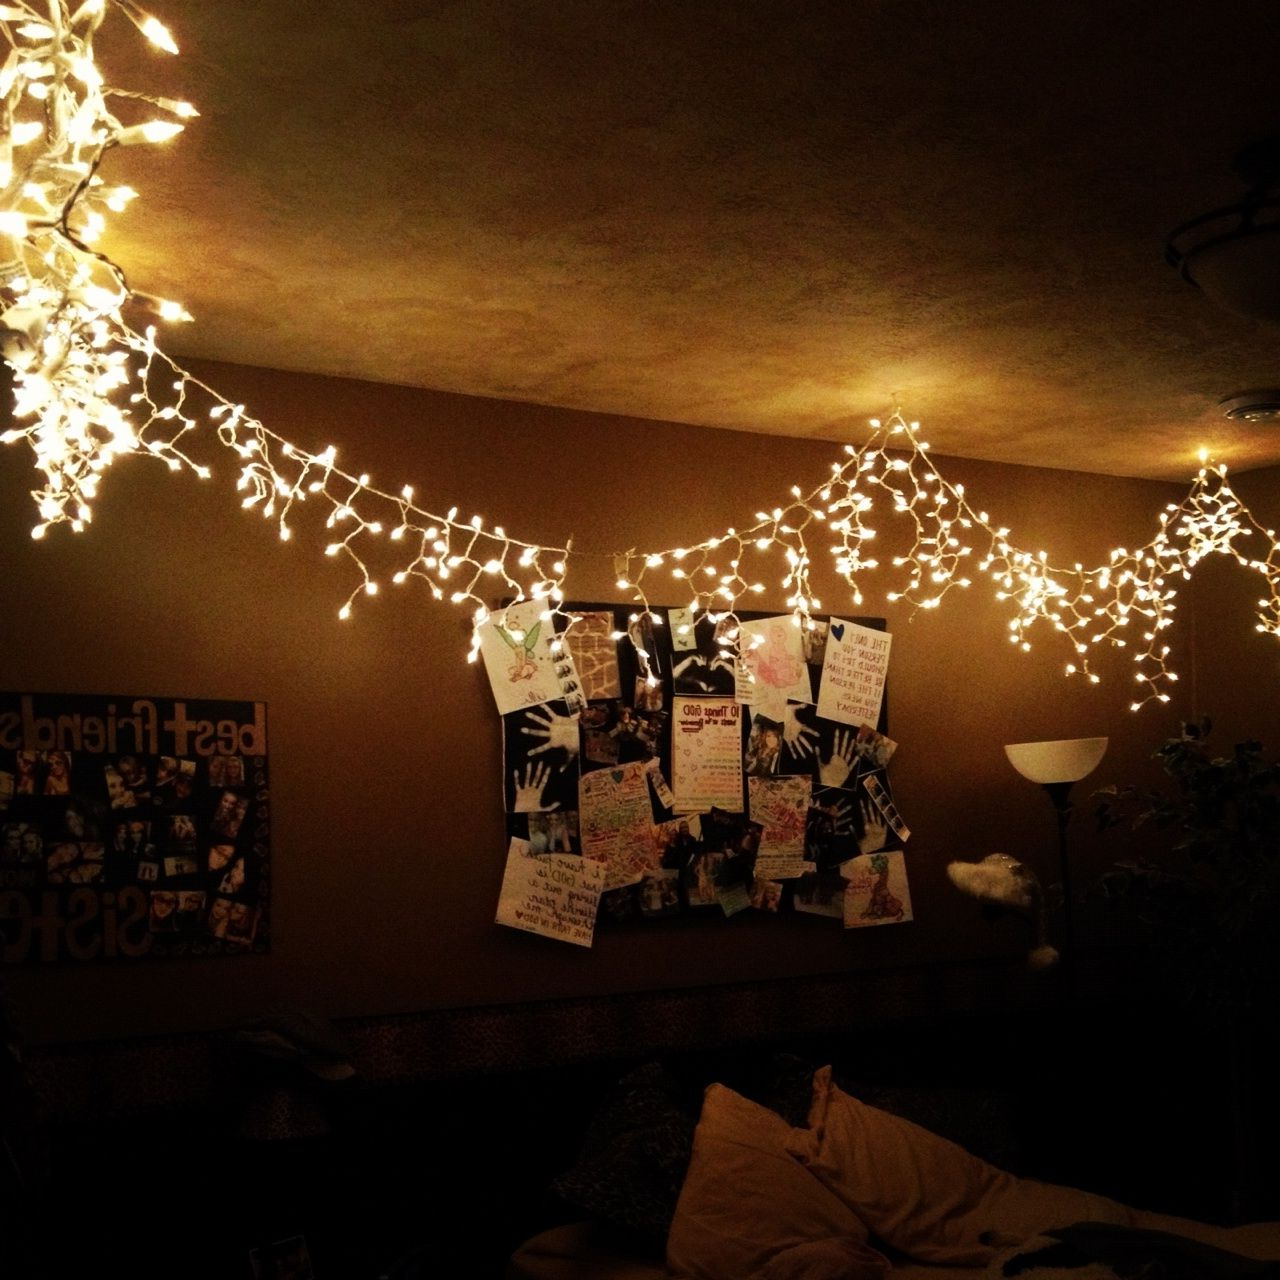 Christmas Lights Wrapping Around The Room Would Be So Cute